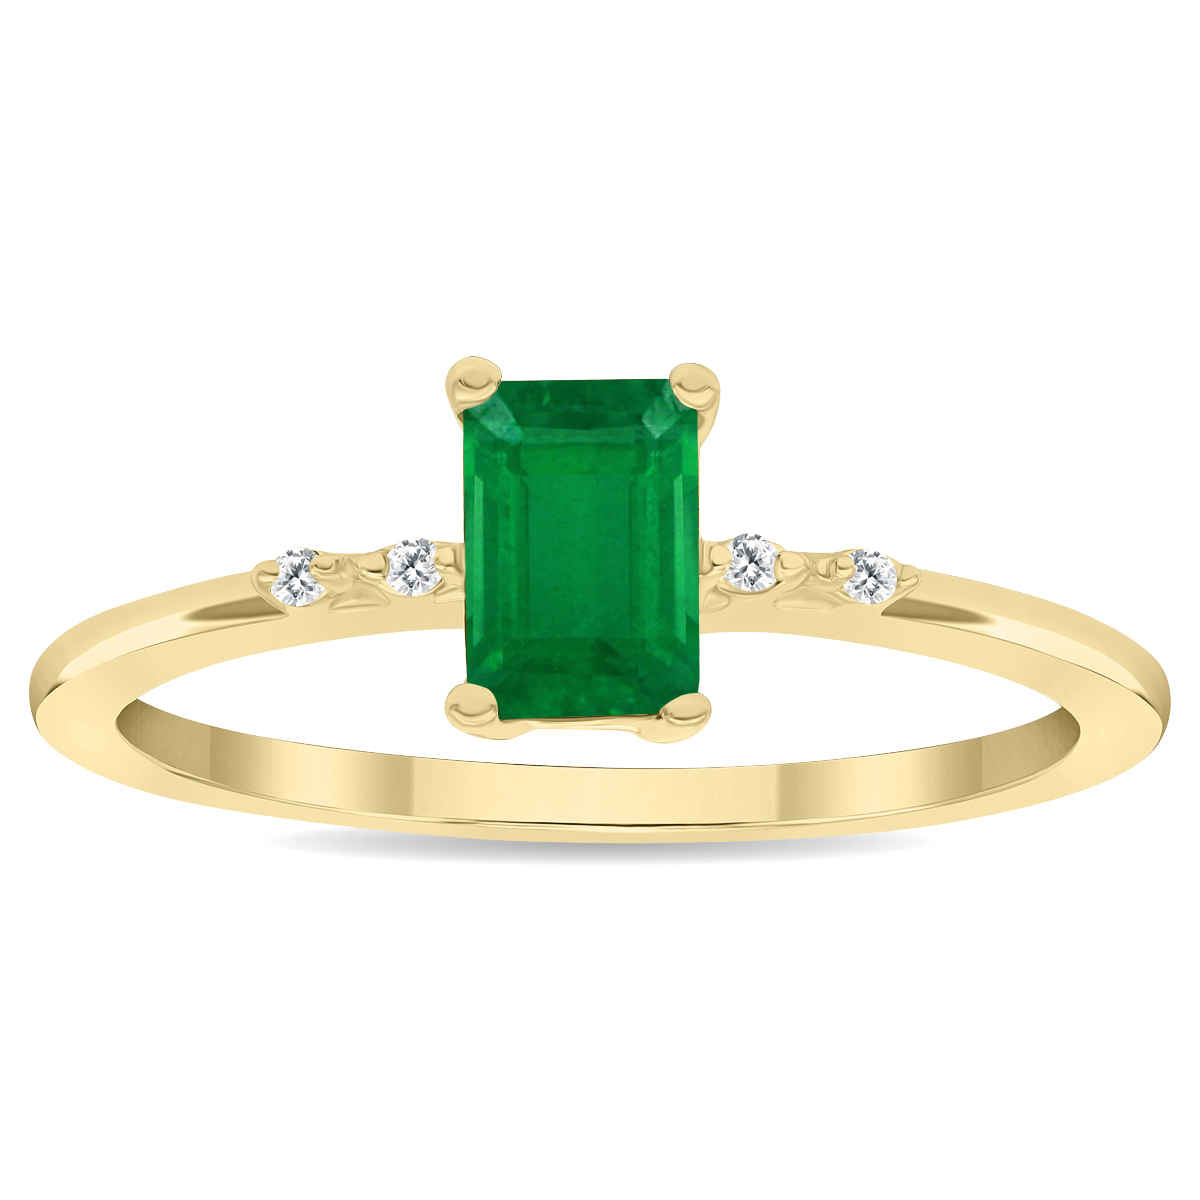 Women's Emerald Cut Emerald and Diamond Sparkle Ring in 10K Yellow Gold